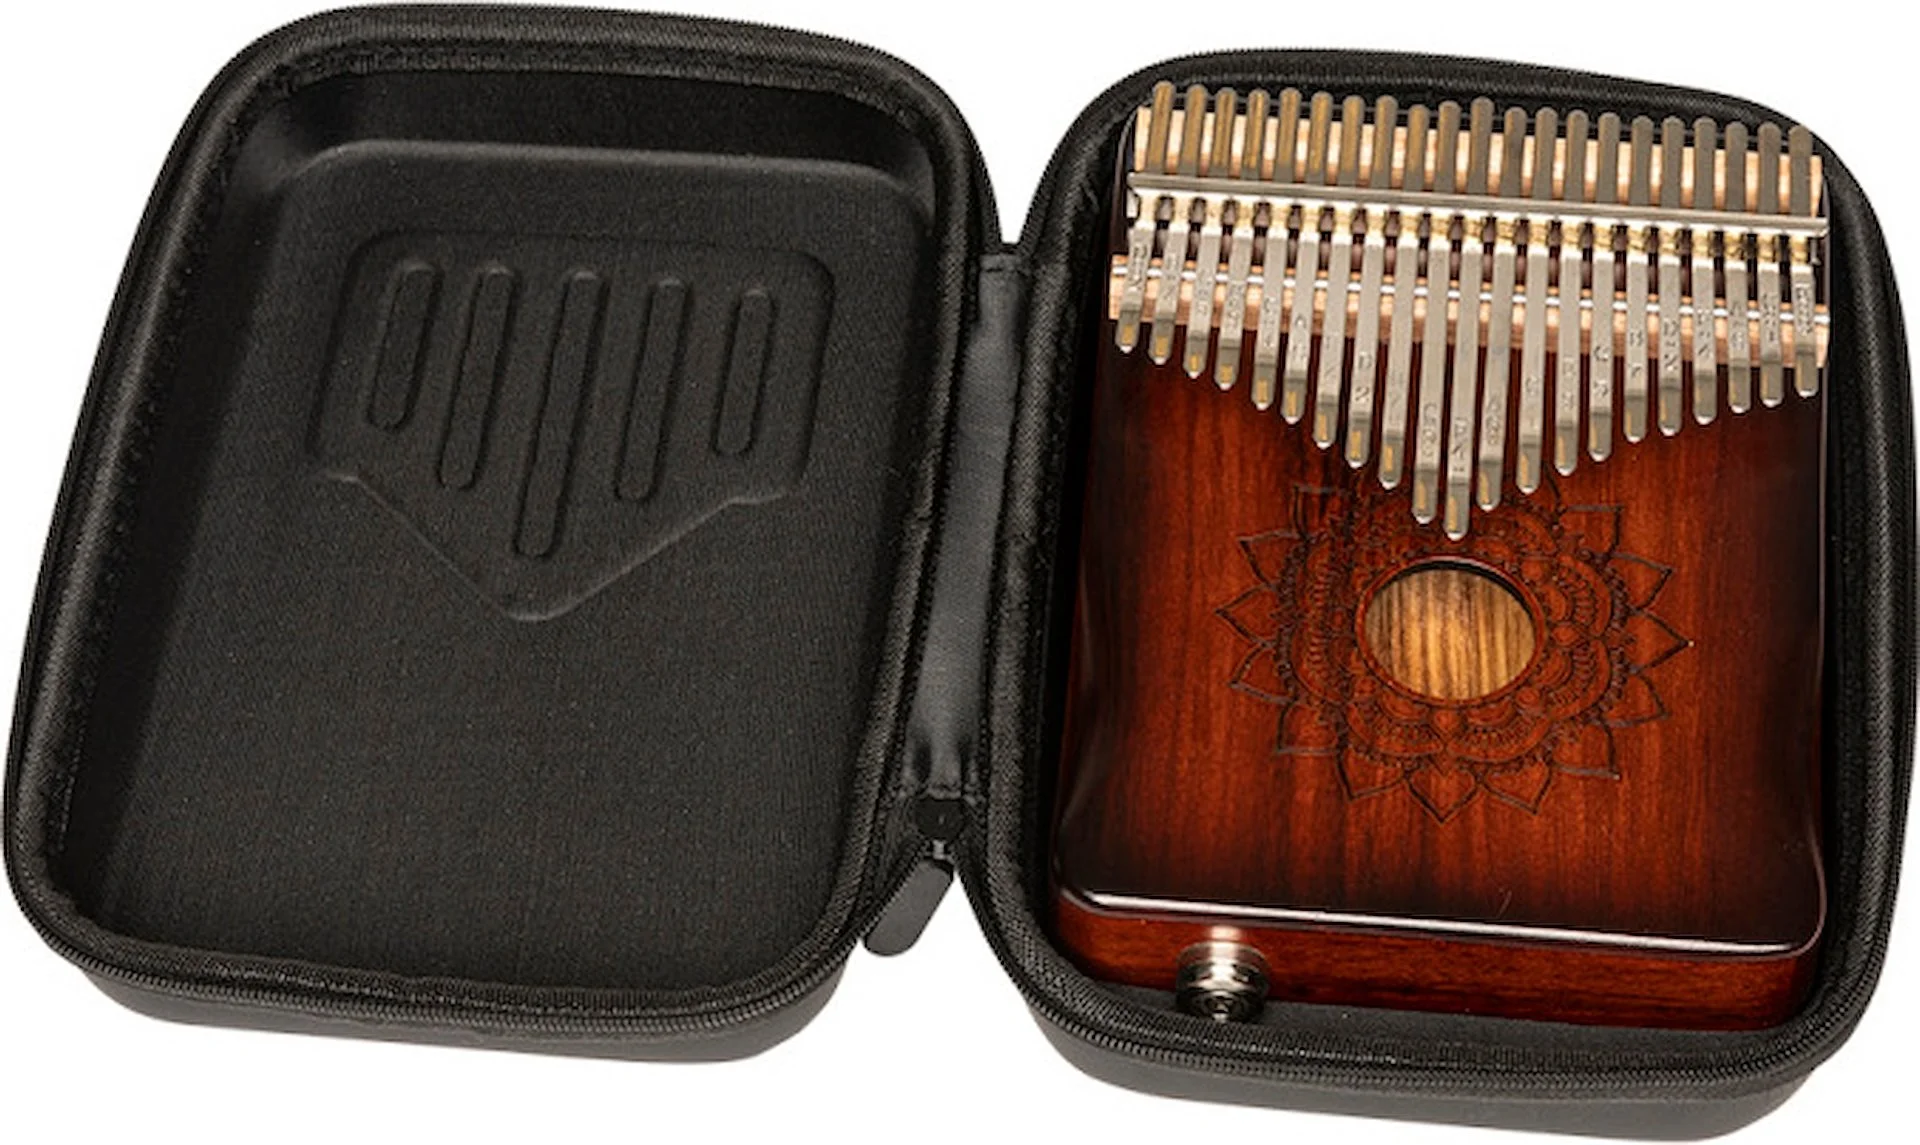 Stagg 21 Note Professional Electro-Acoustic Kalimba